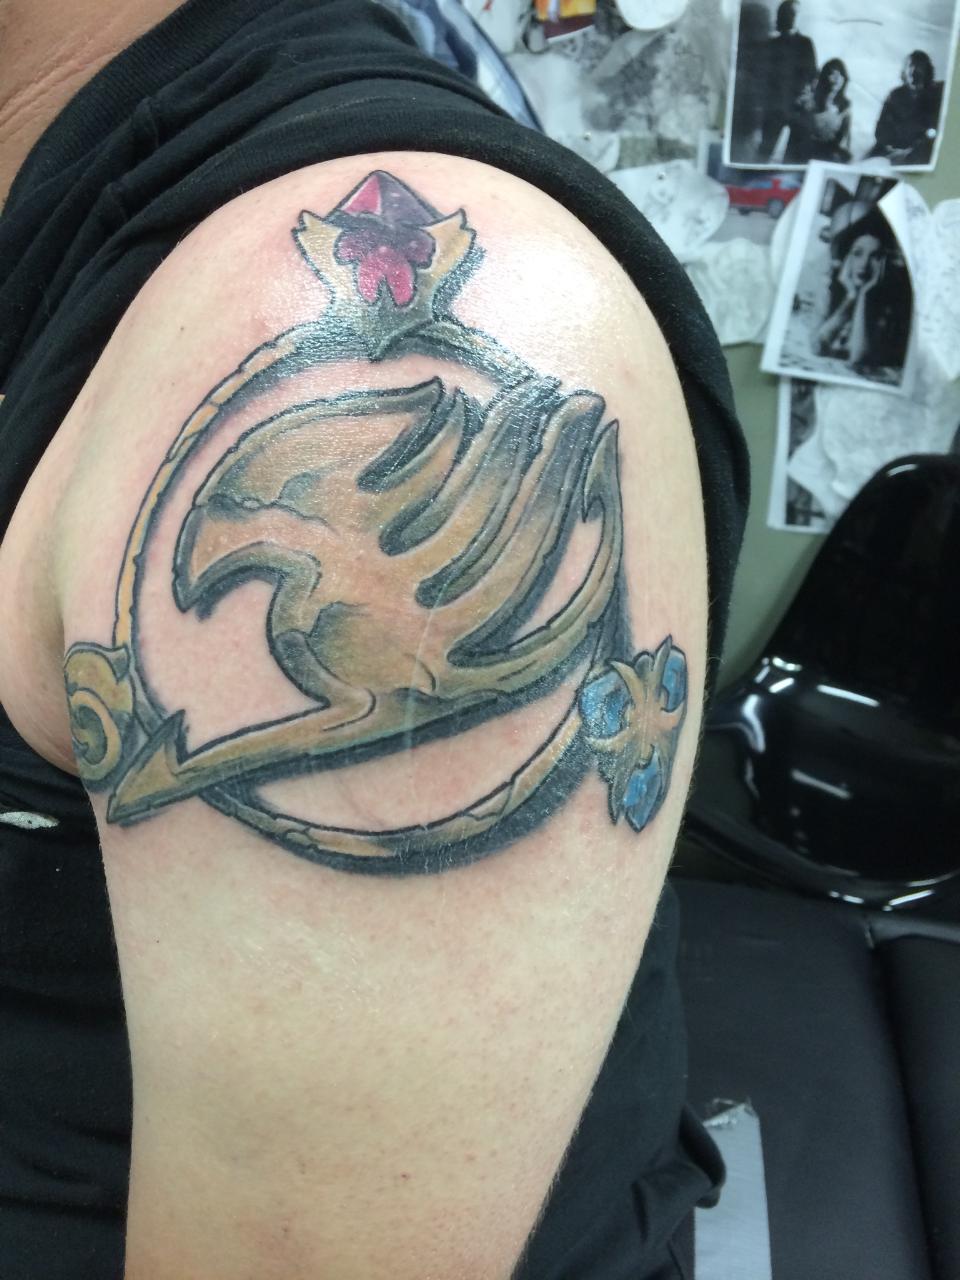 Awesome Fairy Tail And Zelda Spiritual Stones Tattoo On Left Shoulder